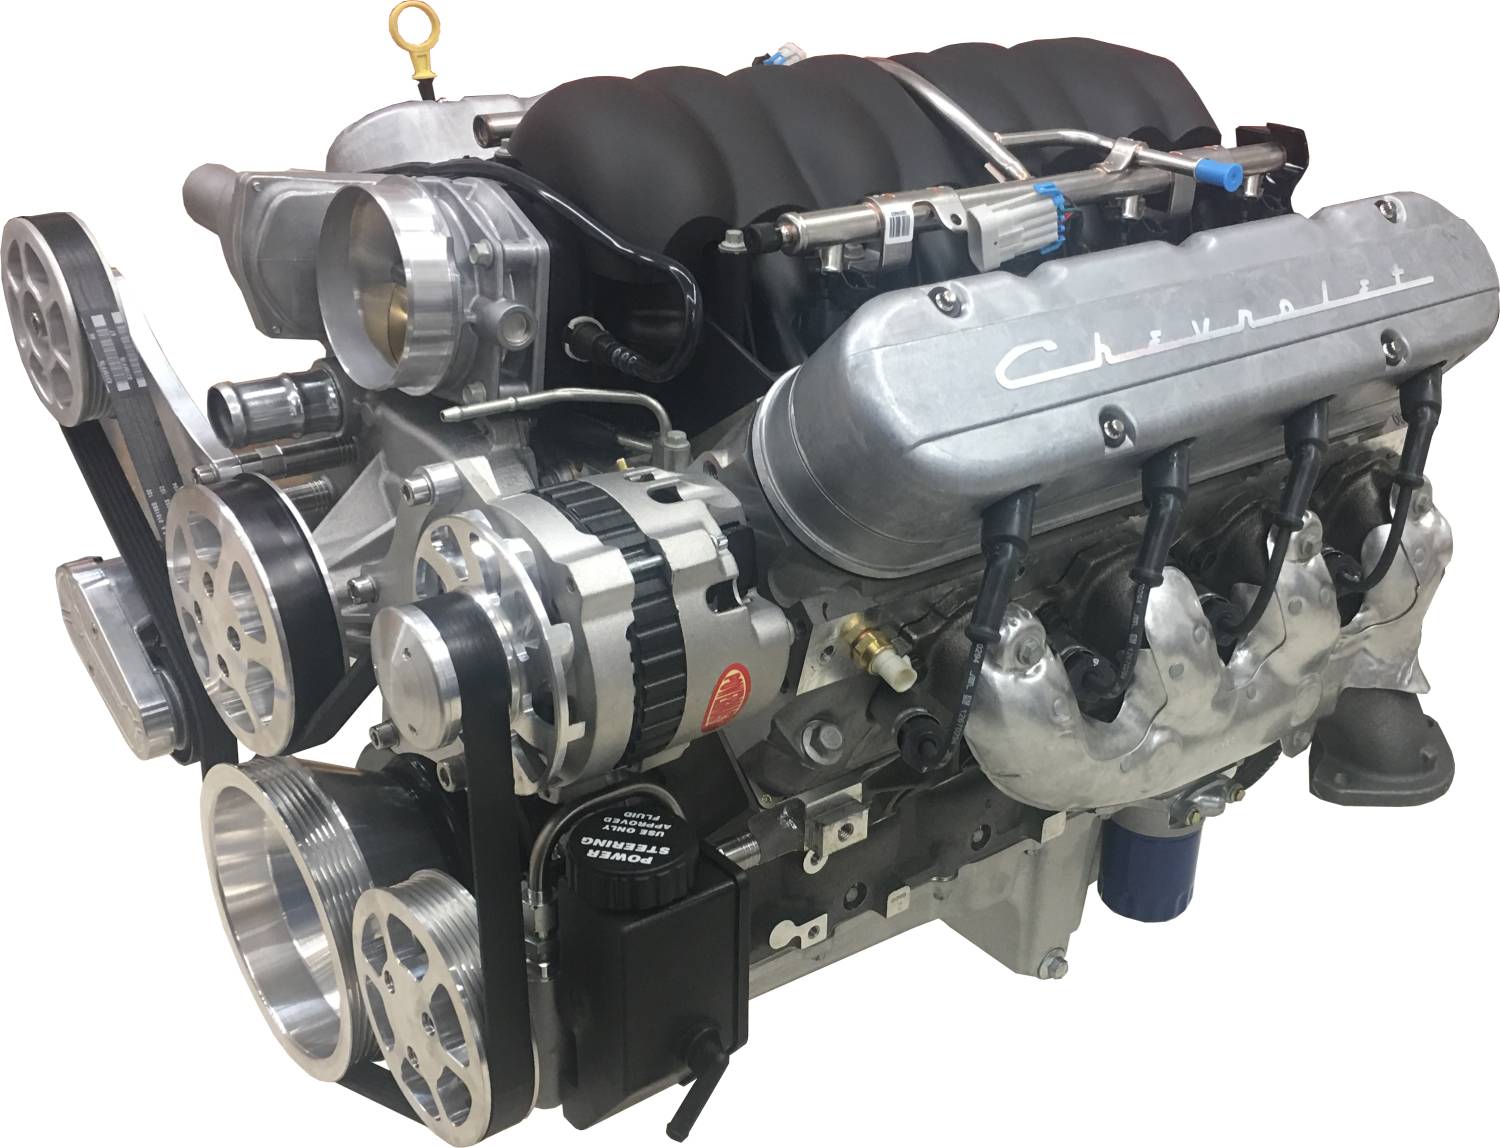 Chevy Ls Crate Engines For Sale